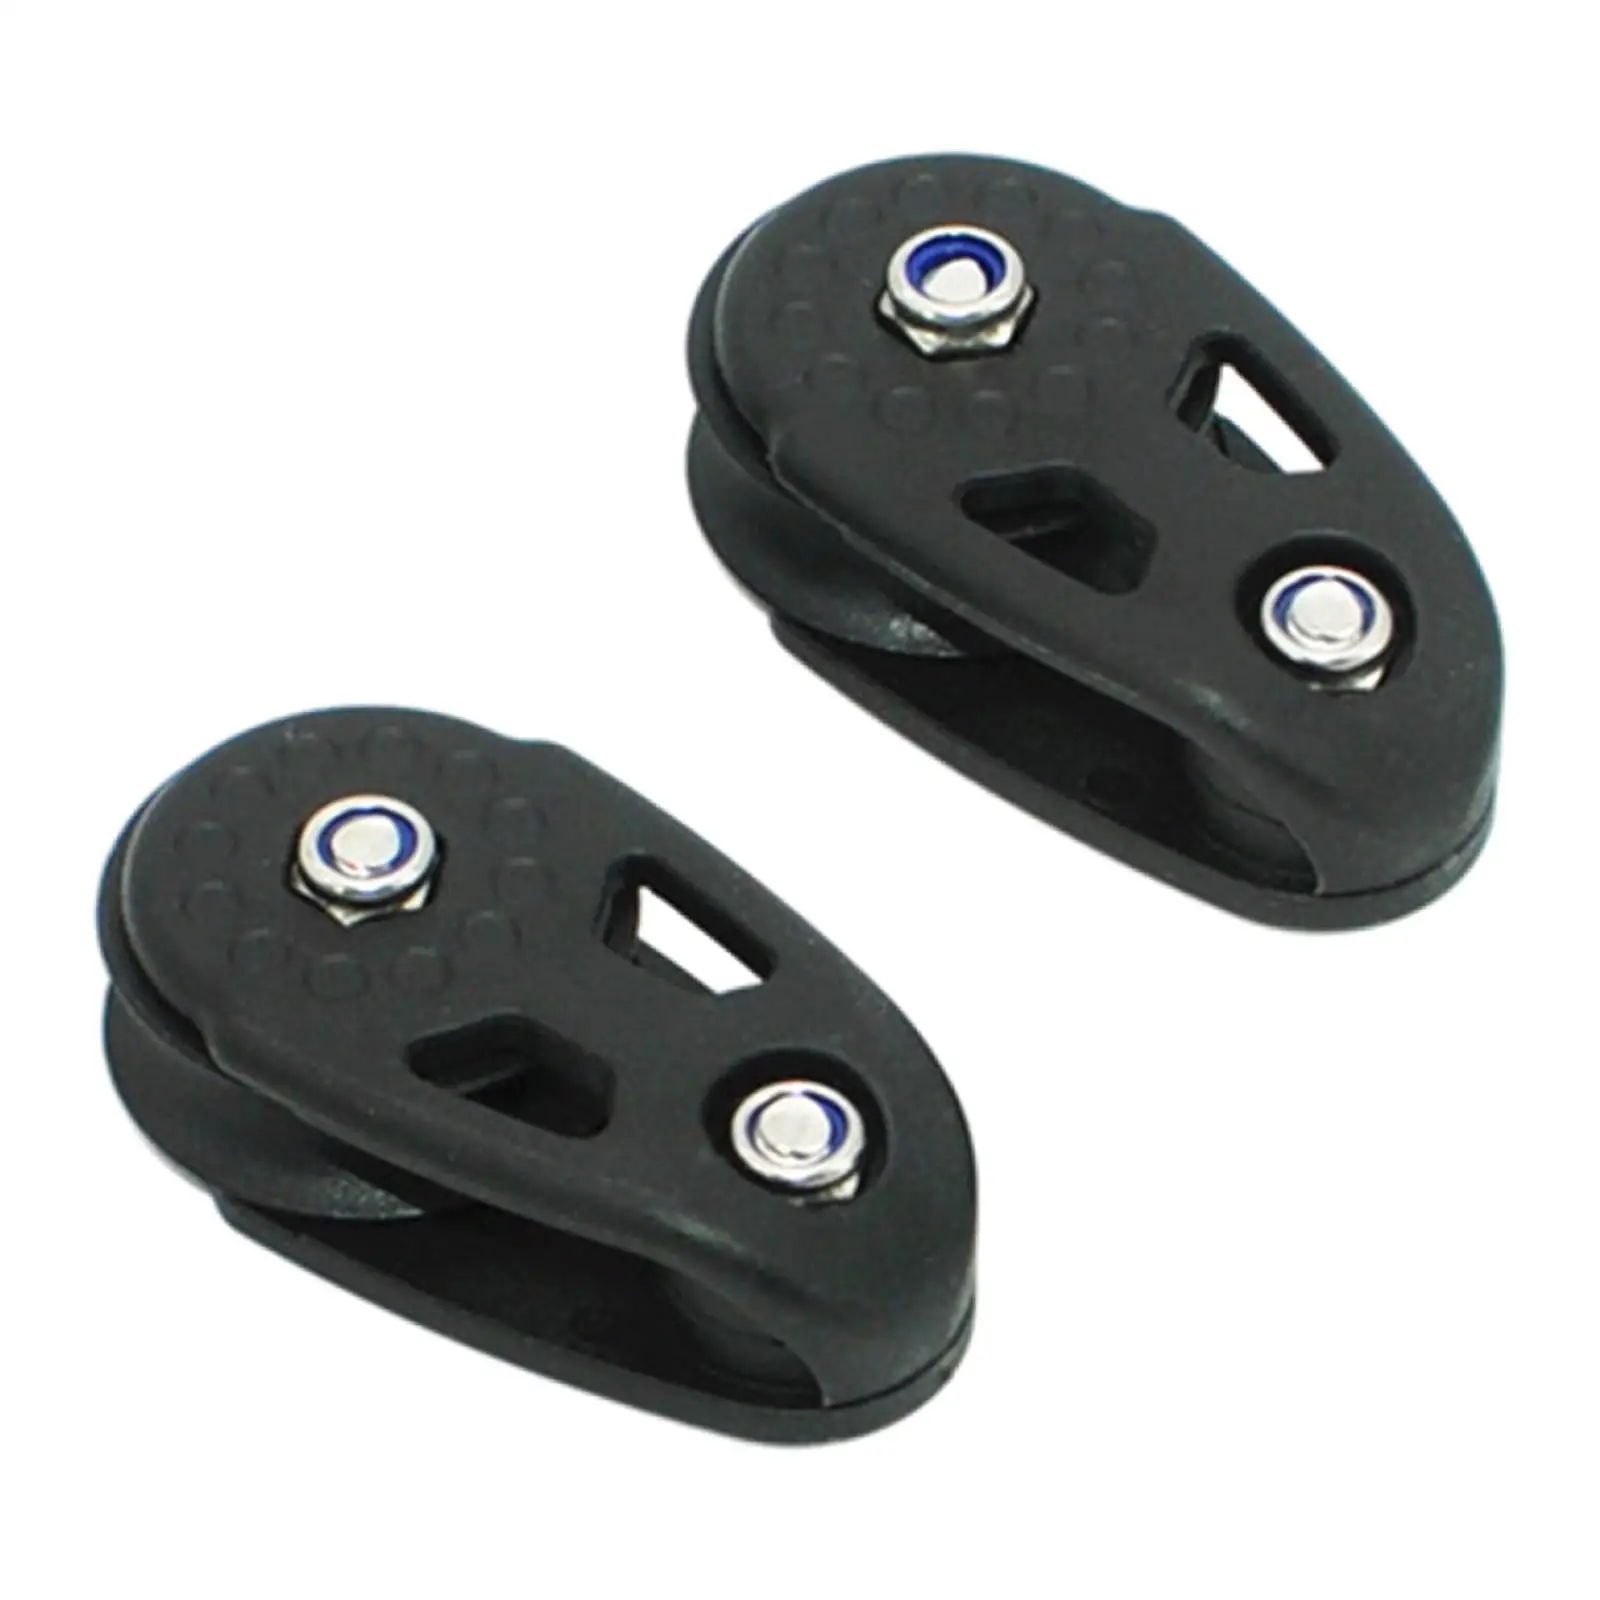 2 Pieces Kayak Pulley, Replaces 9mm  Diameter Easy to Install Accessories Pulley Blocks Slide  ,Fit for Boats Canoe